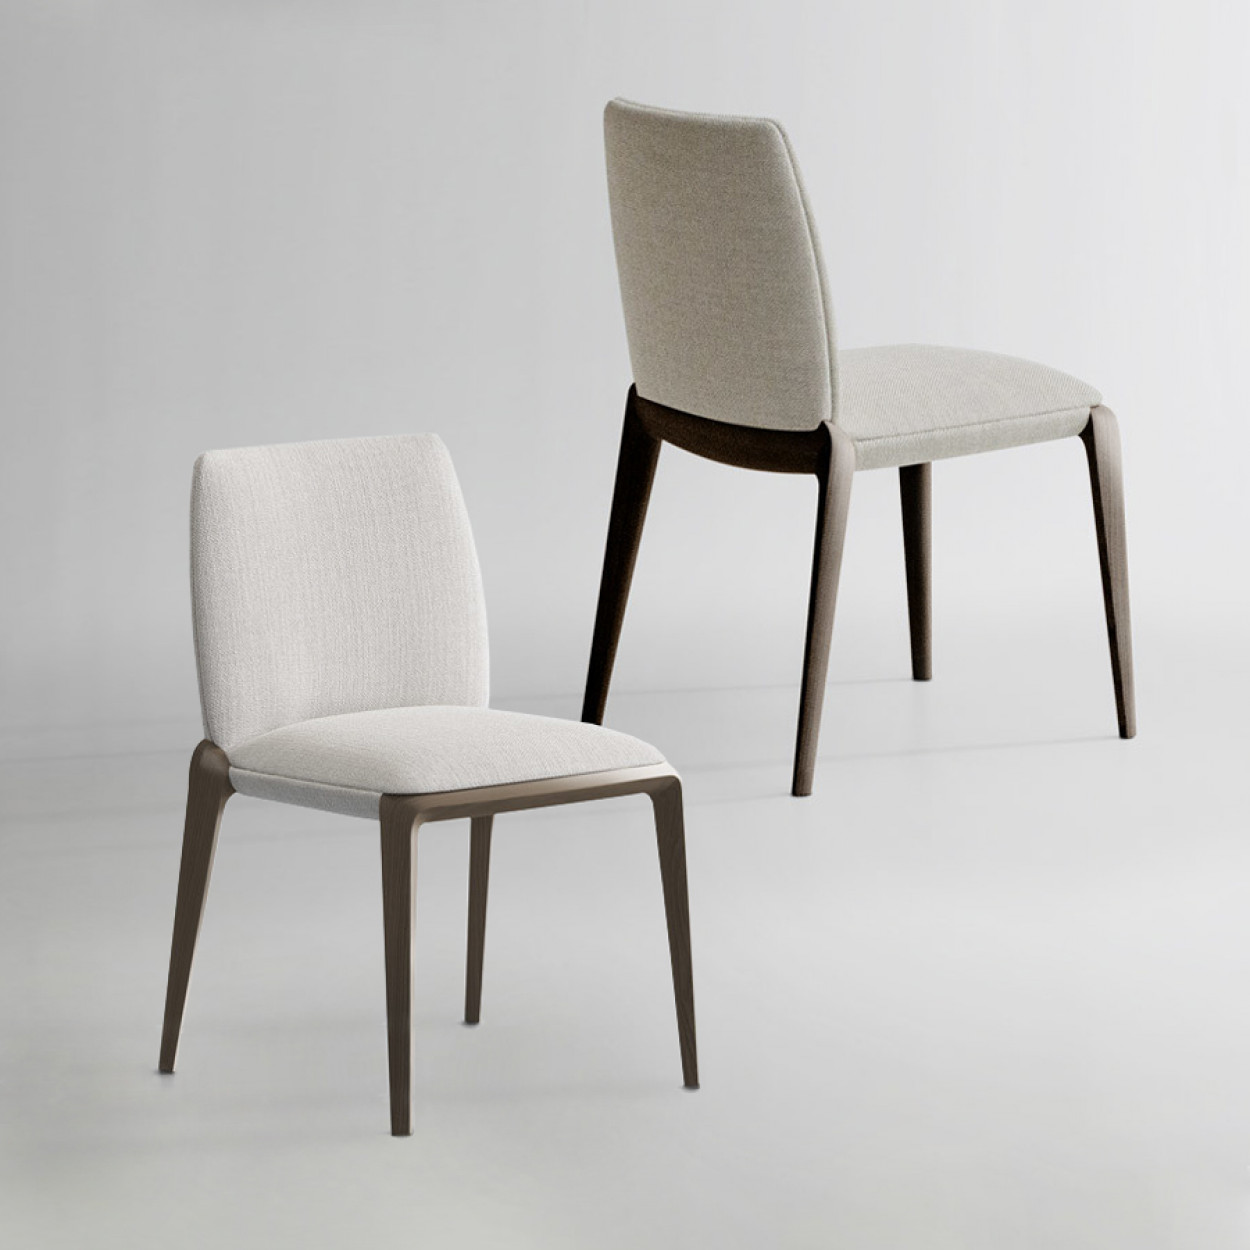 New Transitional Seating Collection